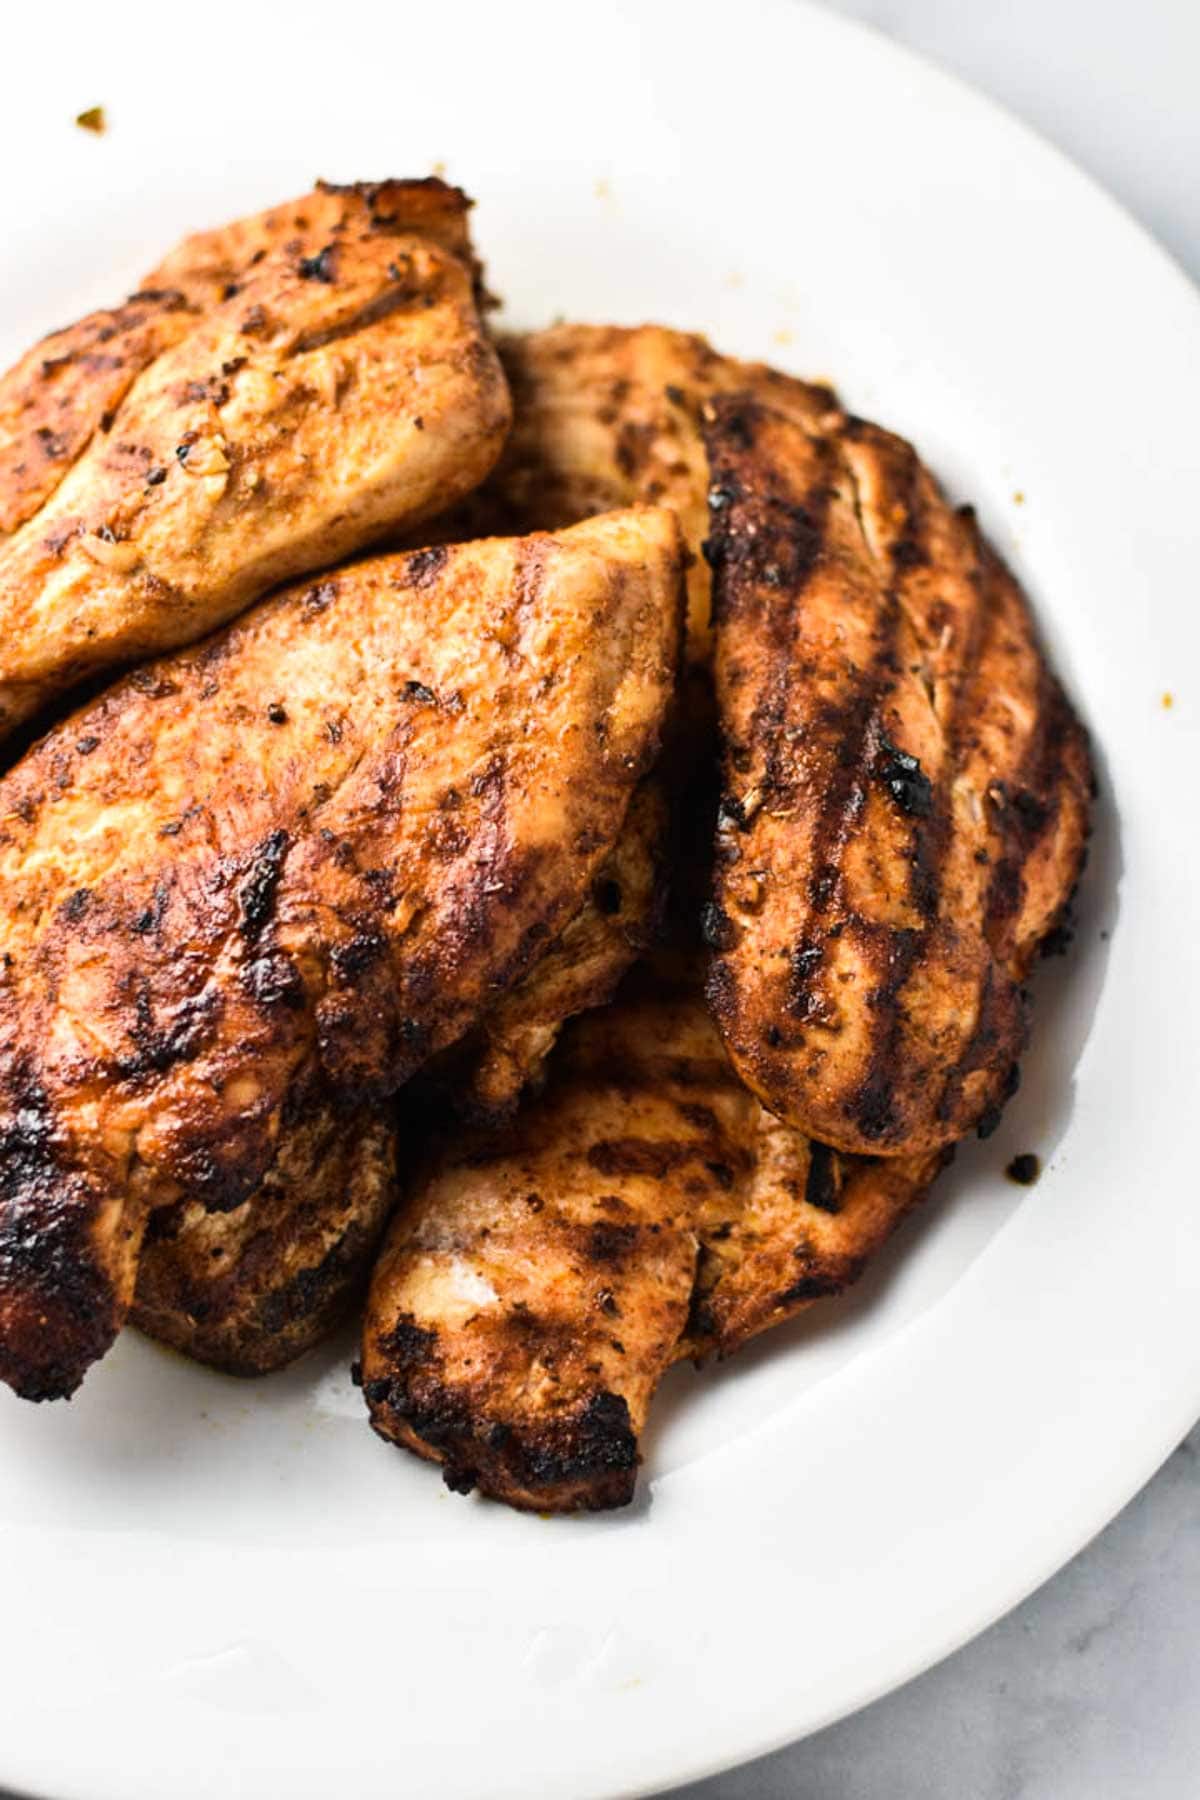 Grilled chicken on a white plate